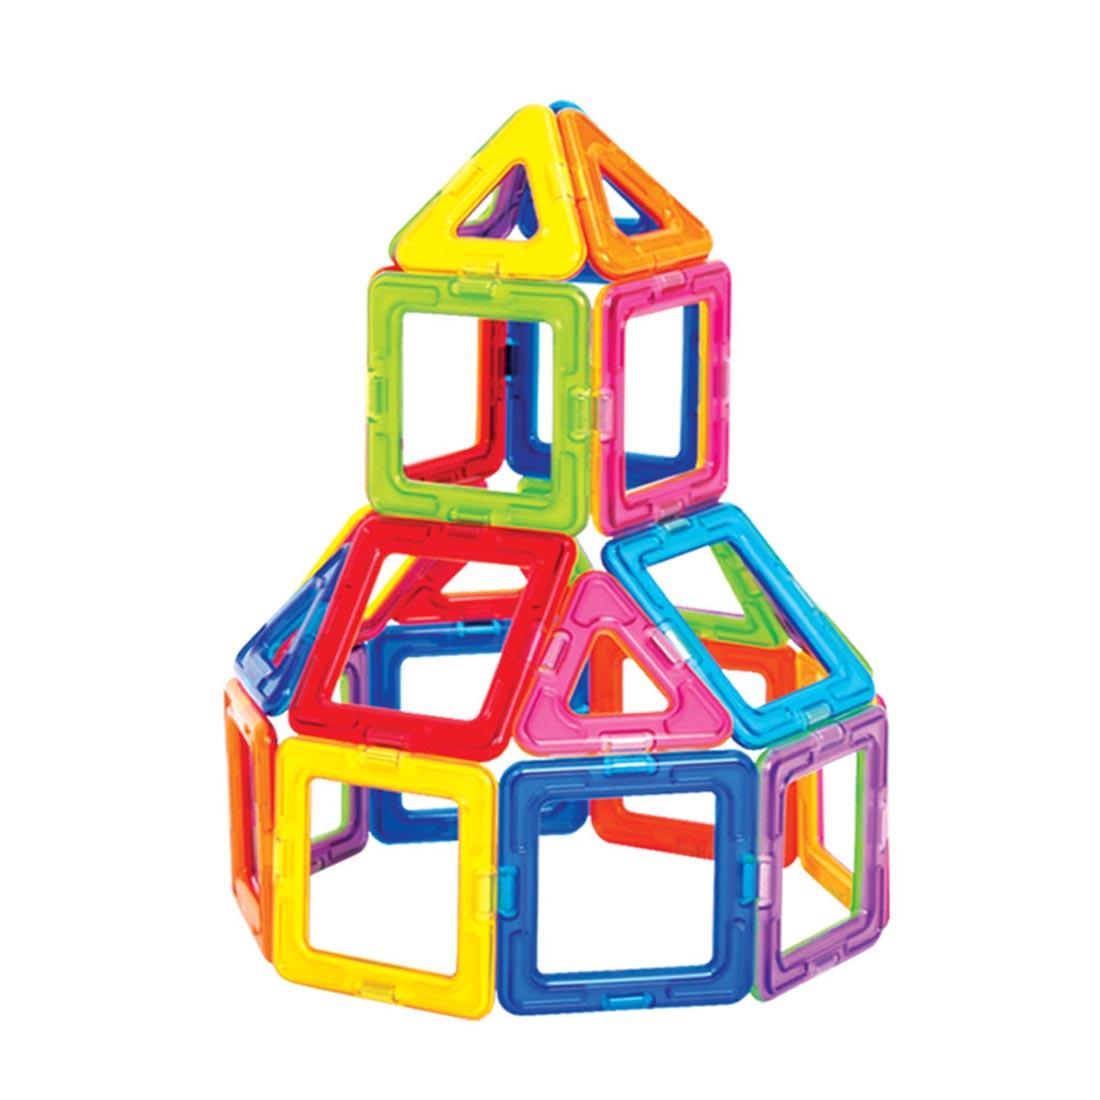 Tower made with pieces from the Magformers 30-Piece Basic Set